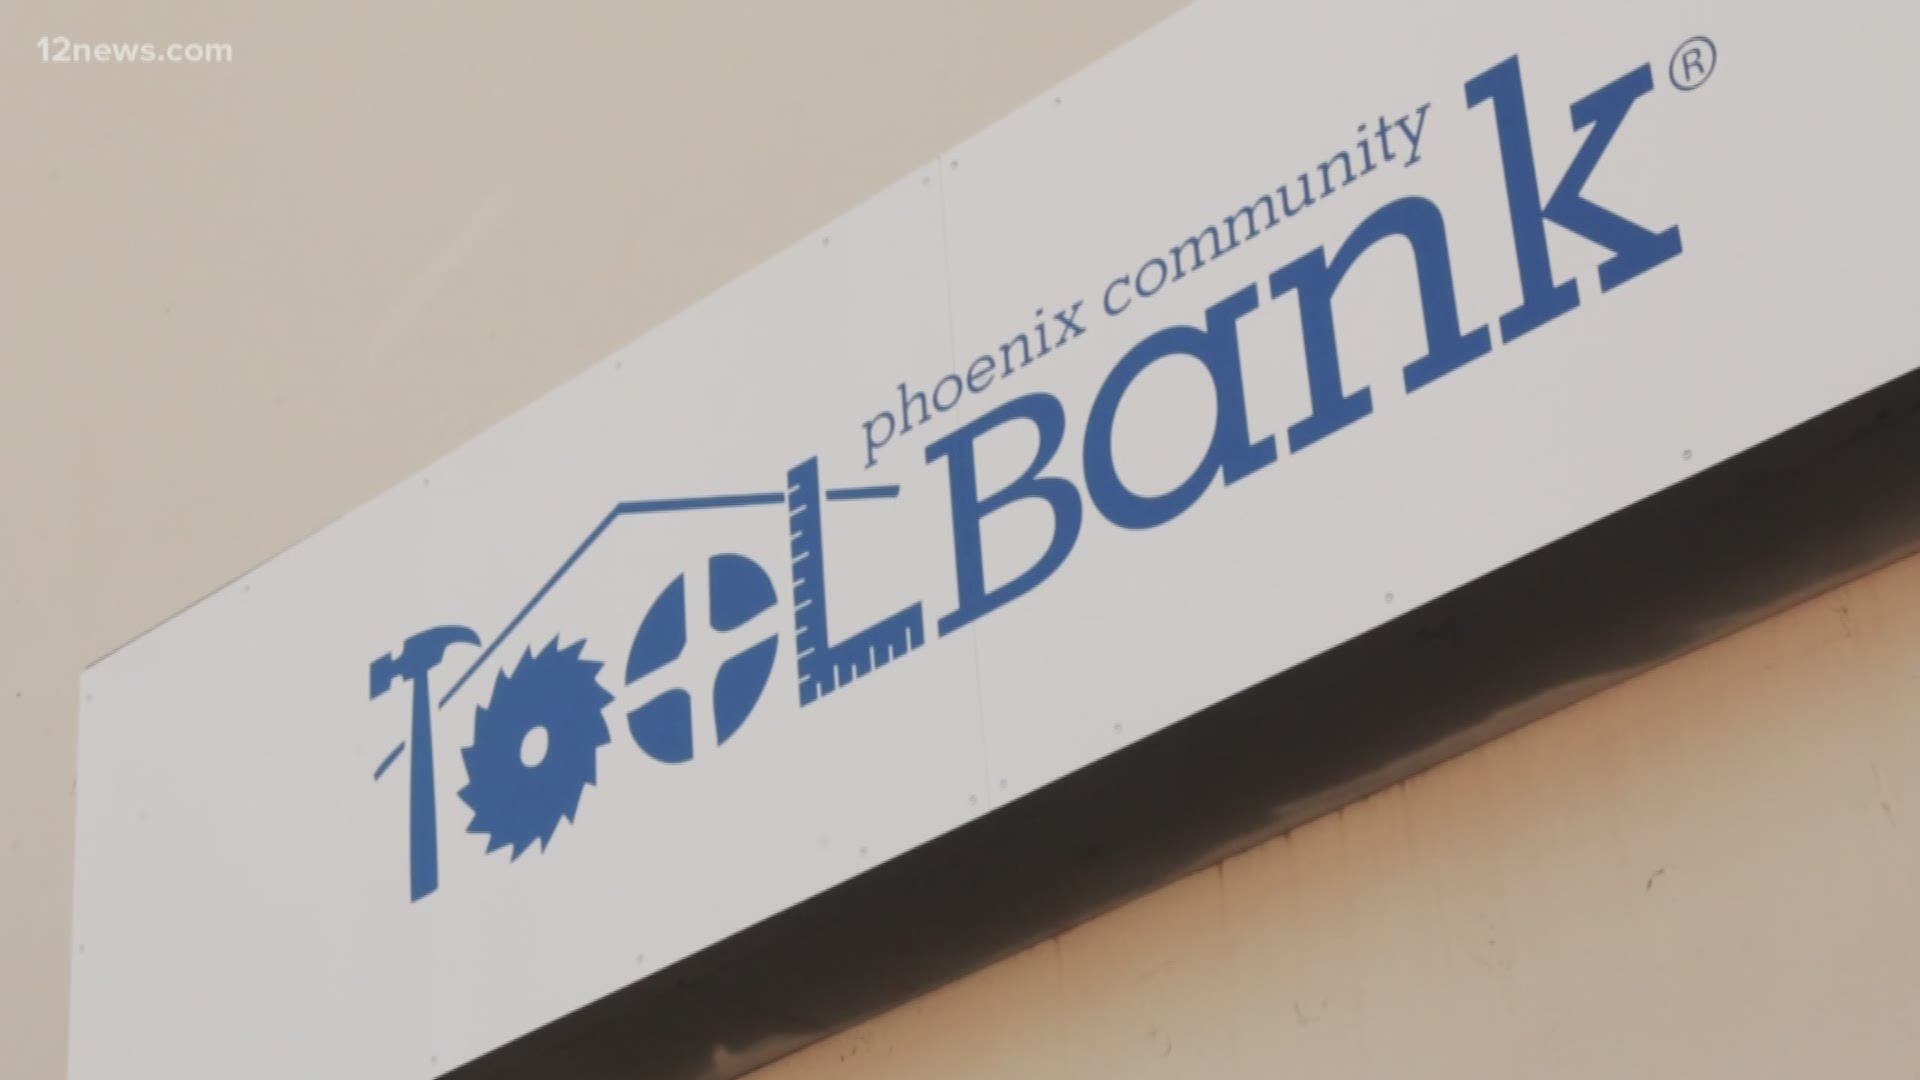 Toolbank is a resource for nonprofit organizations in need of tools to complete their community projects without breaking the budget.